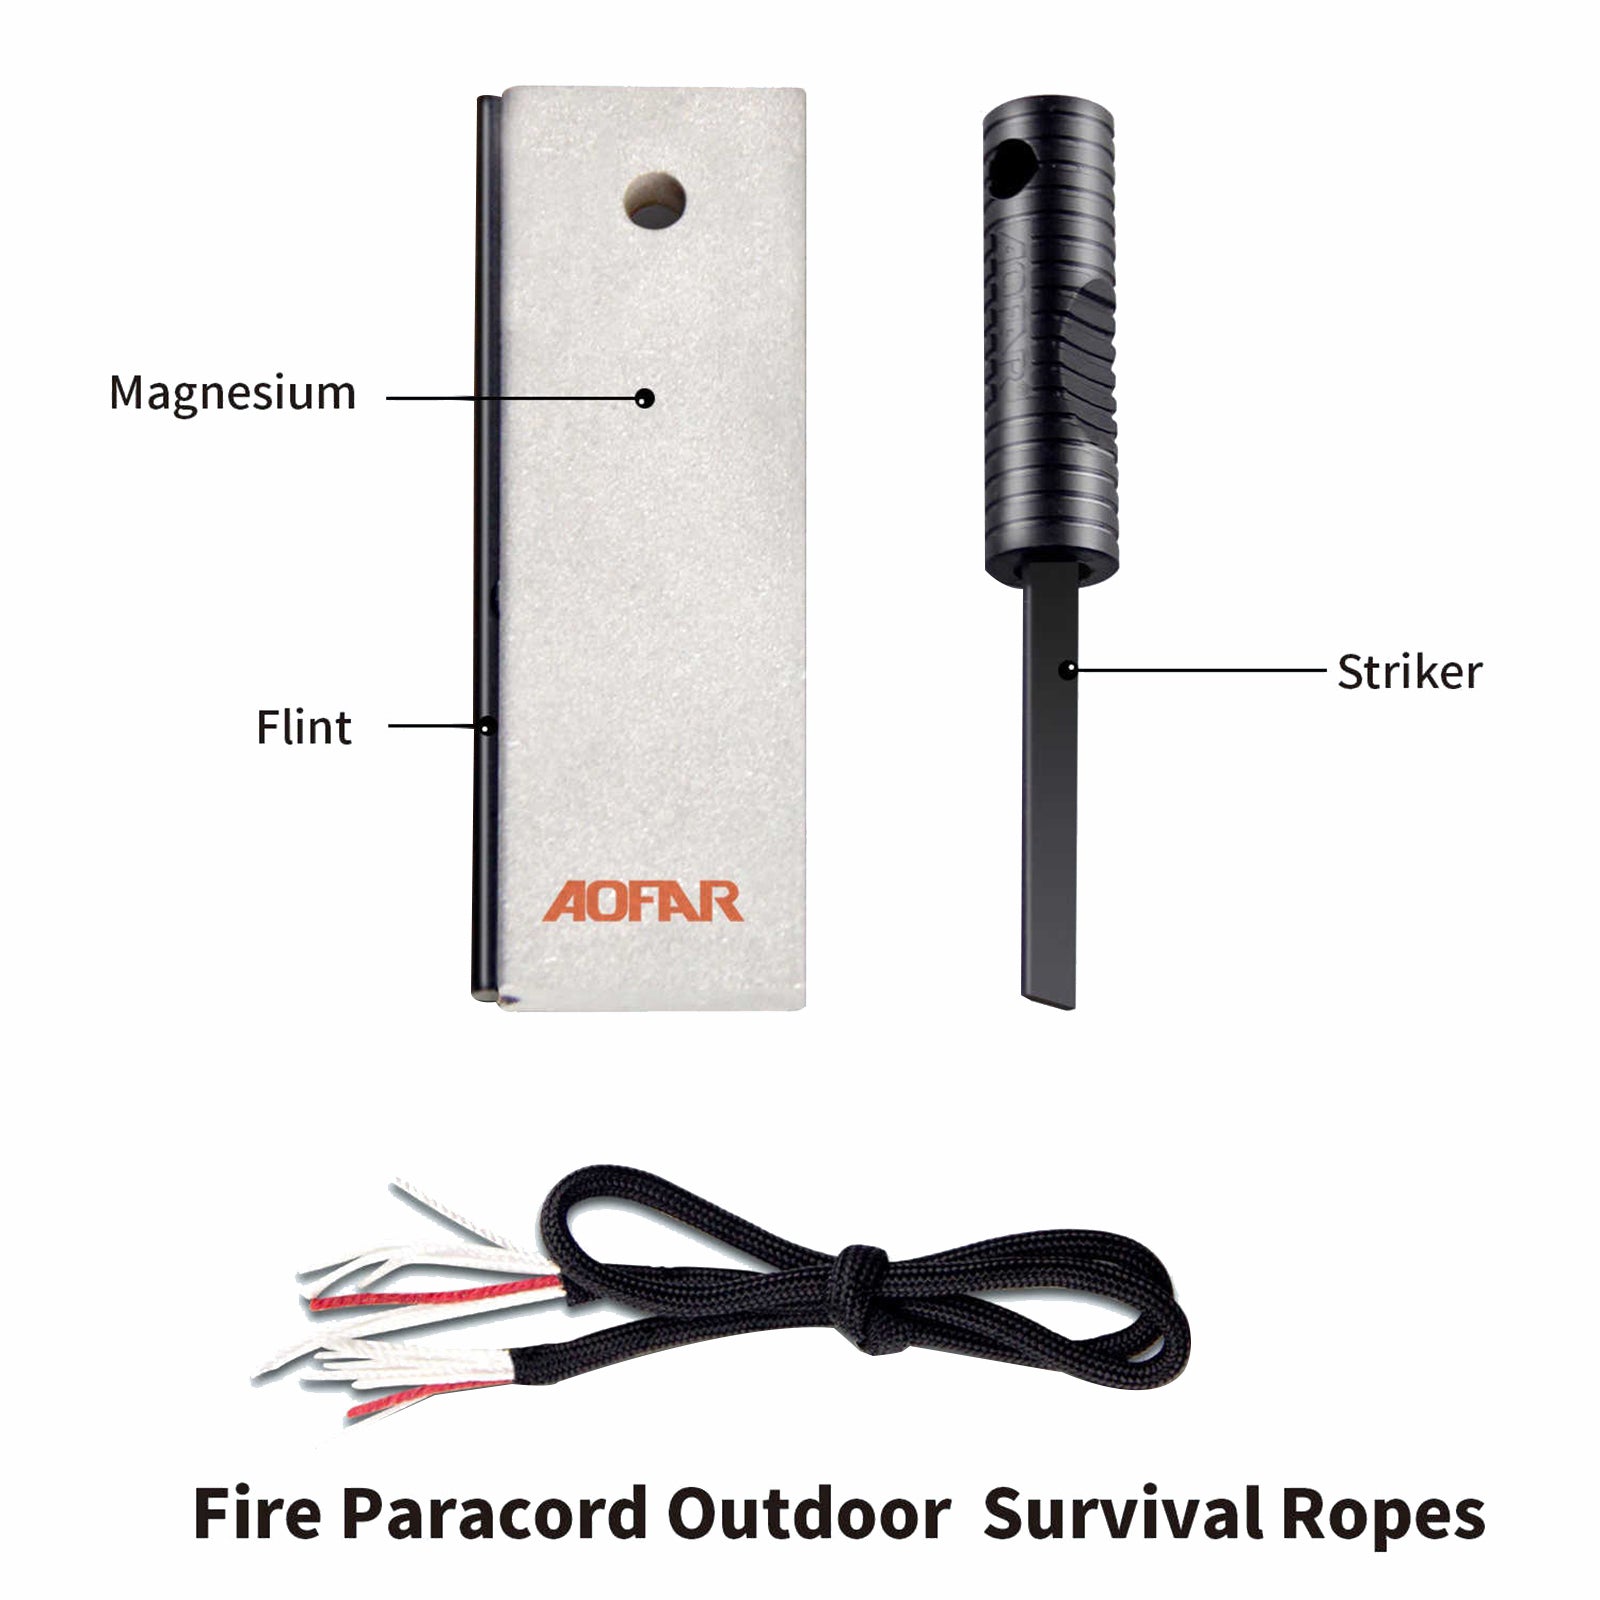 AOFAR Magnesium Fire Starter (2-Pack) Waterproof Pouch for Camping, Hiking, Hunting, Backpacking,Outdoor Survival kit